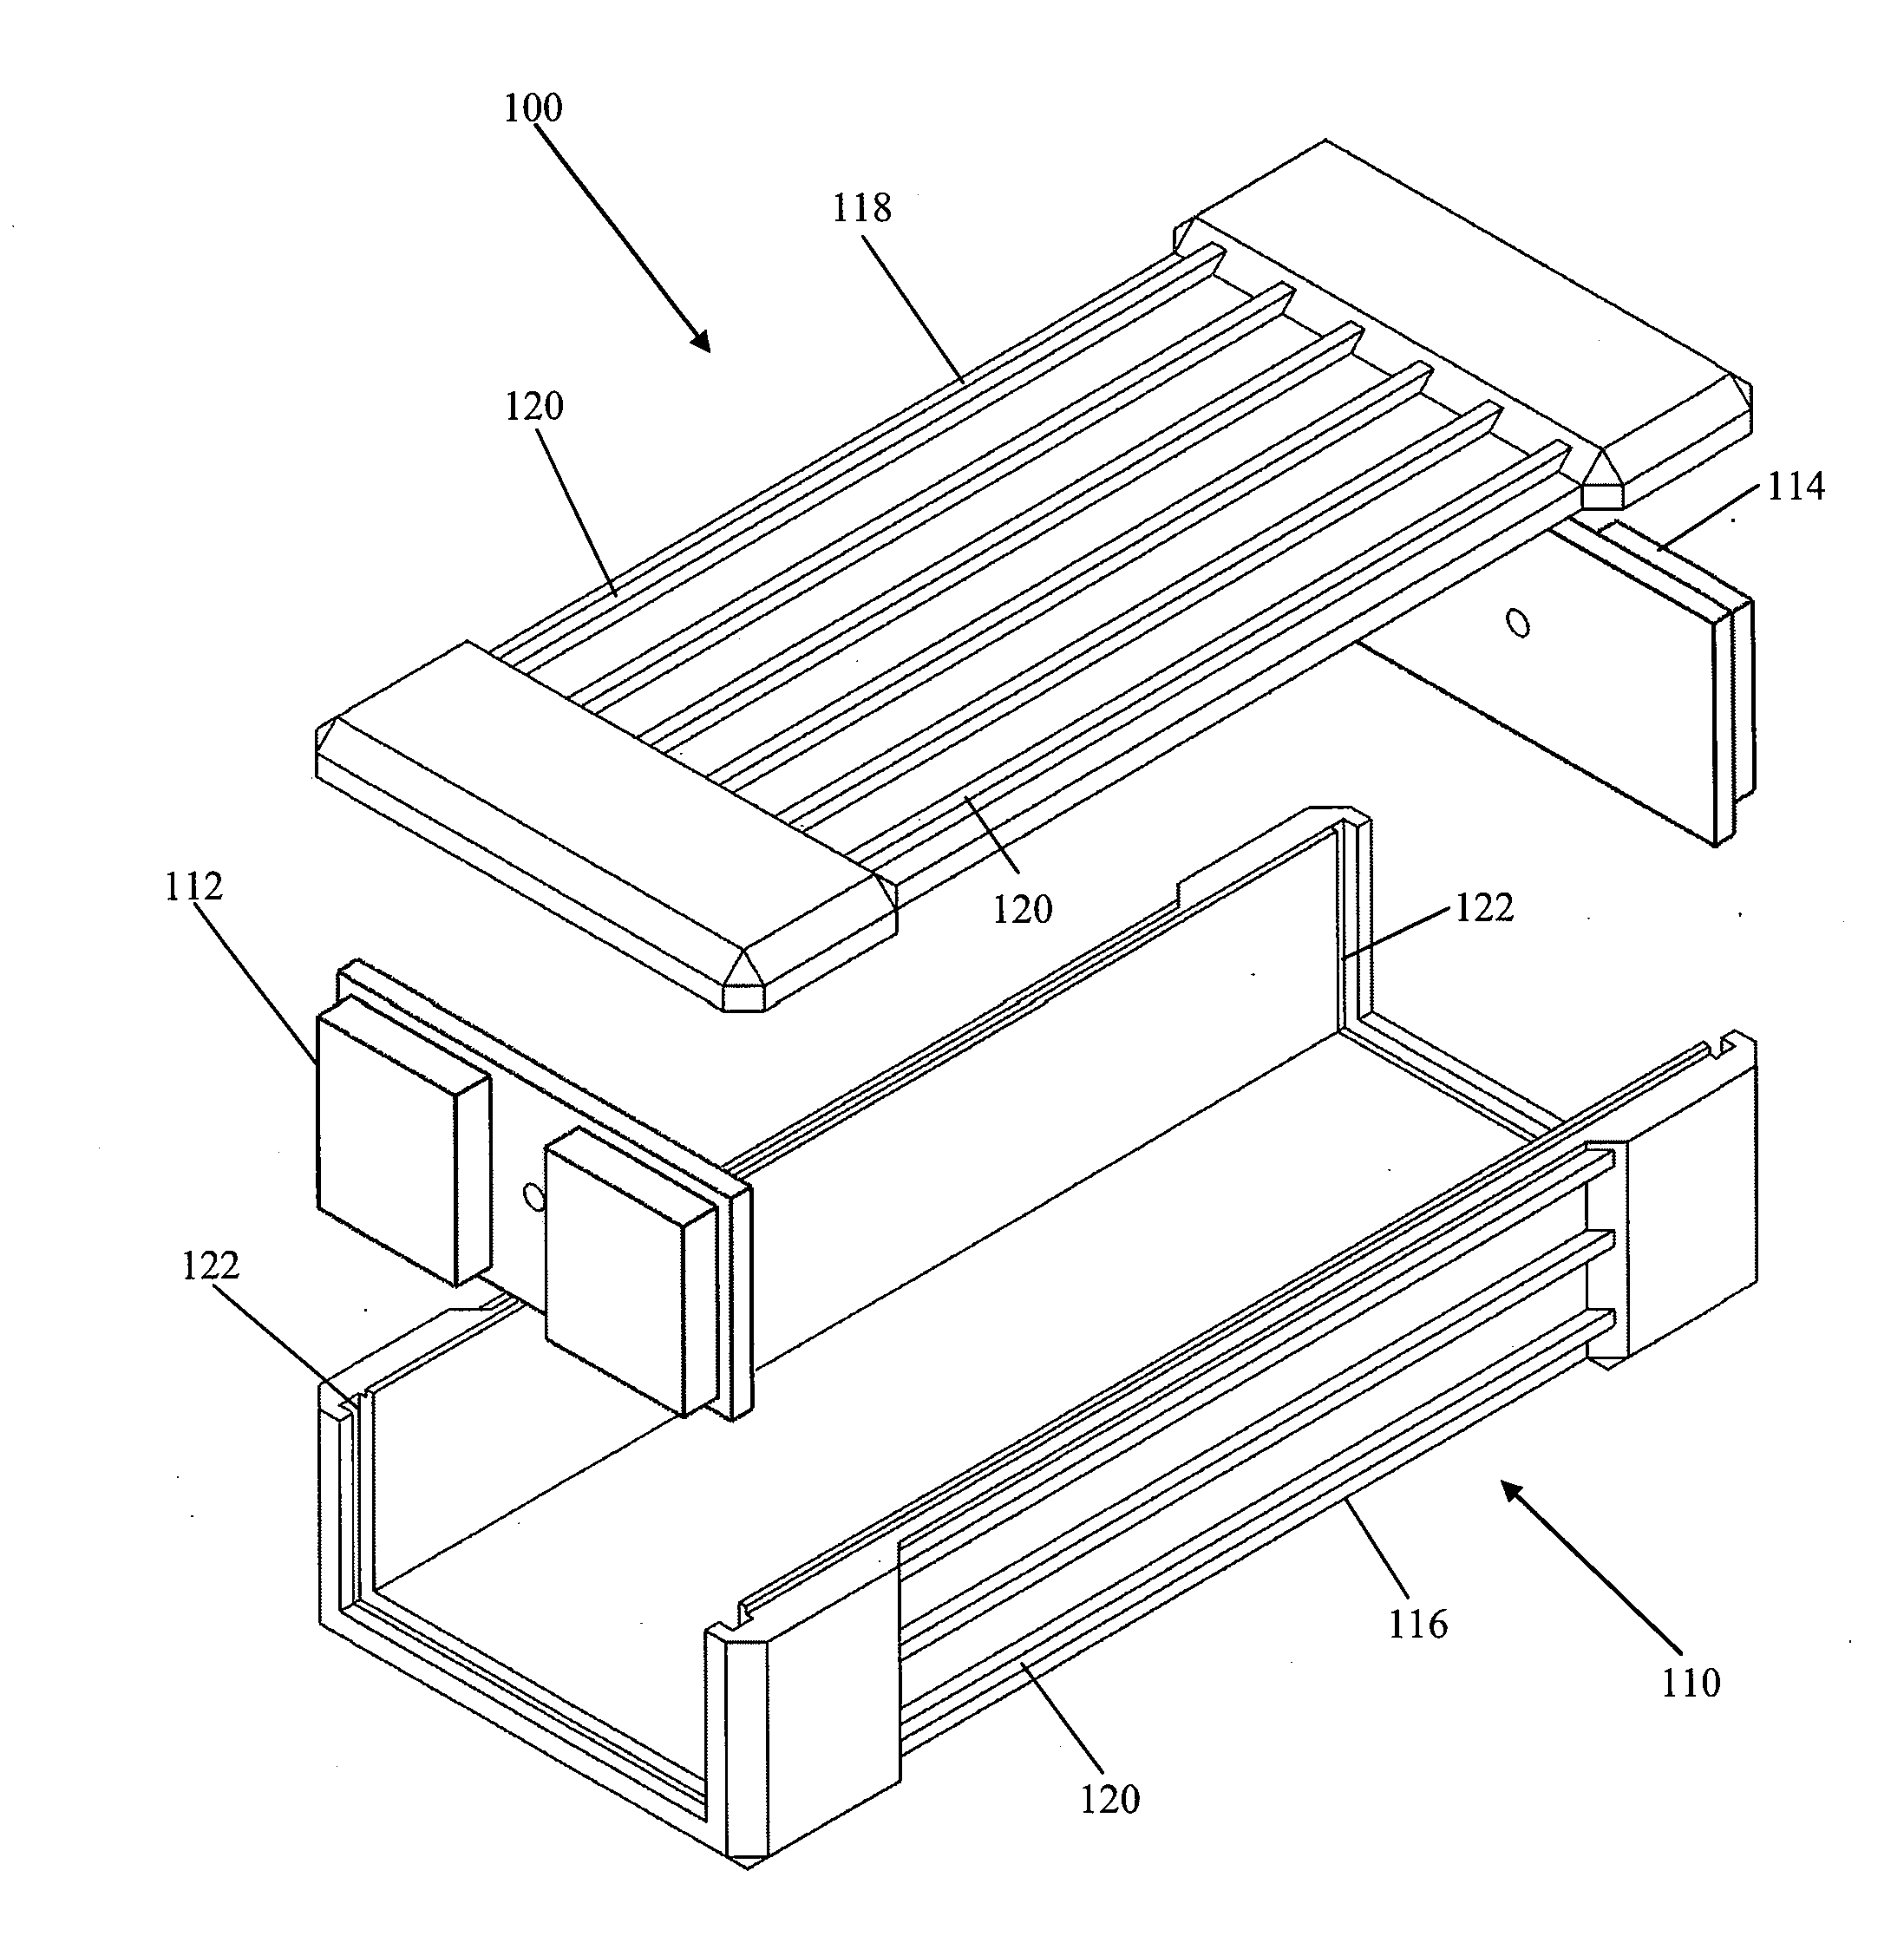 Prismatic polymer case for electrochemical devices